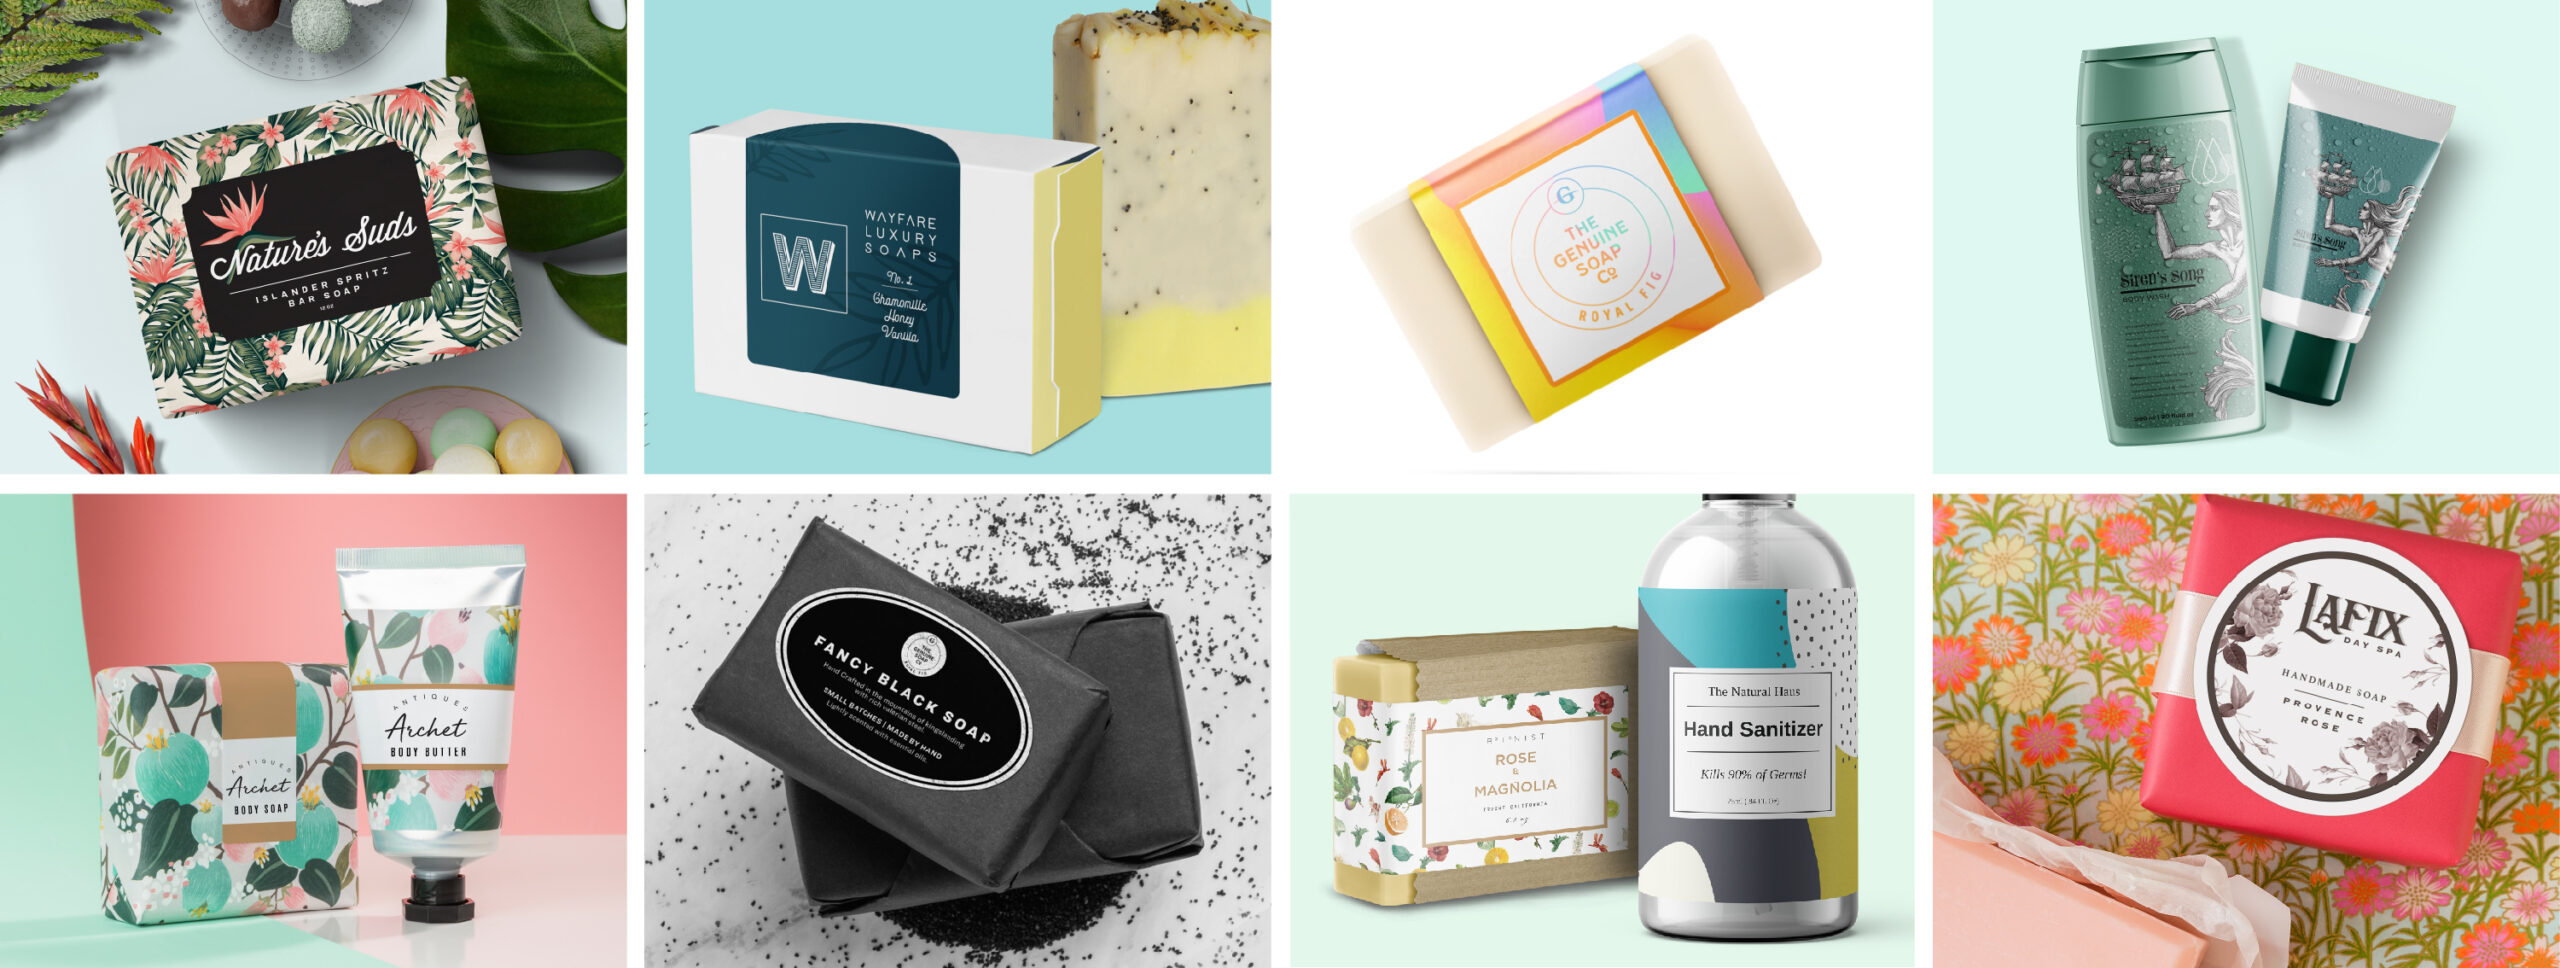 Soap Boxes - Create Custom Product boxes for Homemade Soap